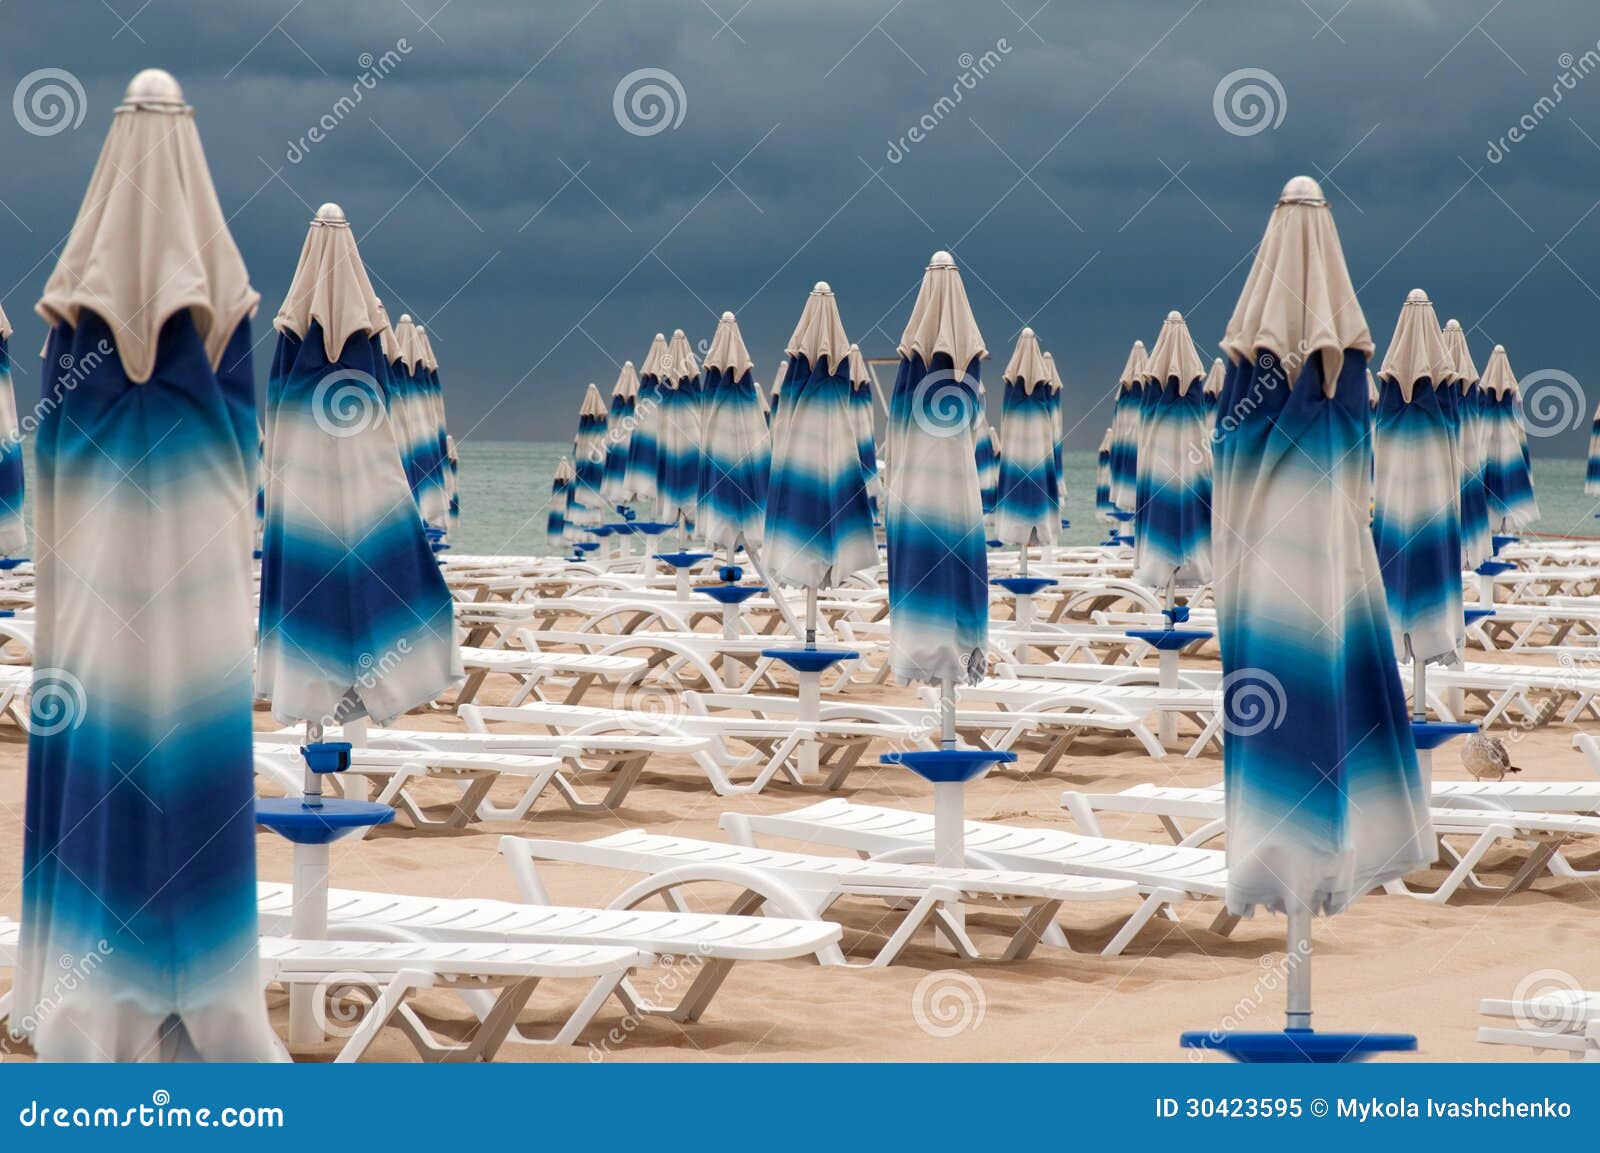 The End of Summer and Beach Stock Image - Image of locations ...